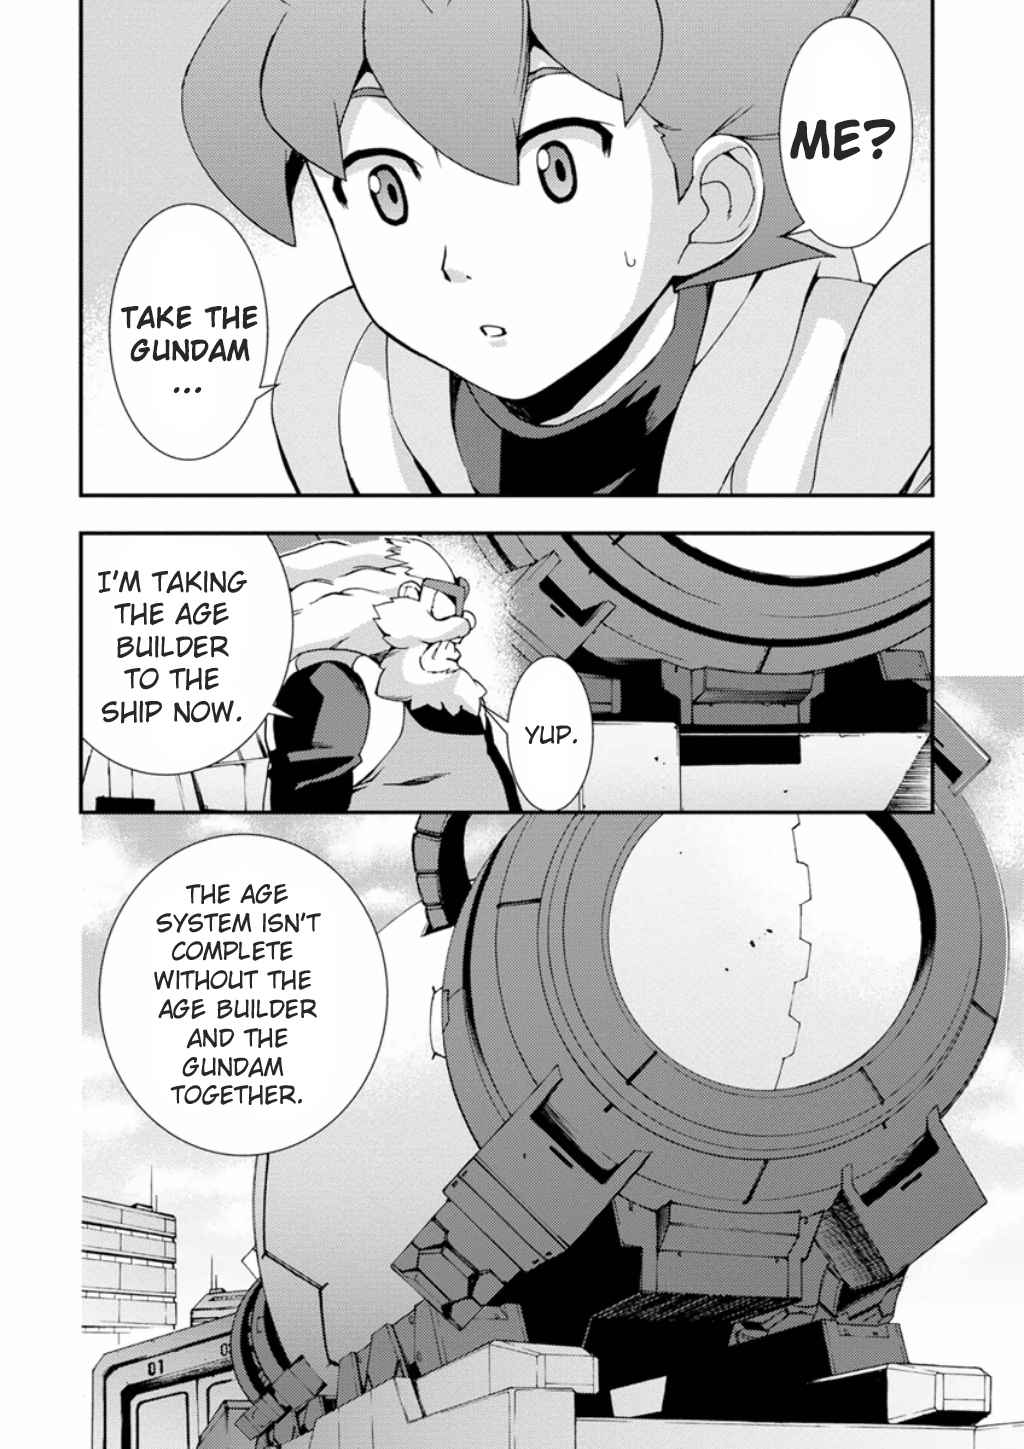 Mobile Suit Gundam AGE: First Evolution Vol. 1 Ch. 2 The Collapse of Nora